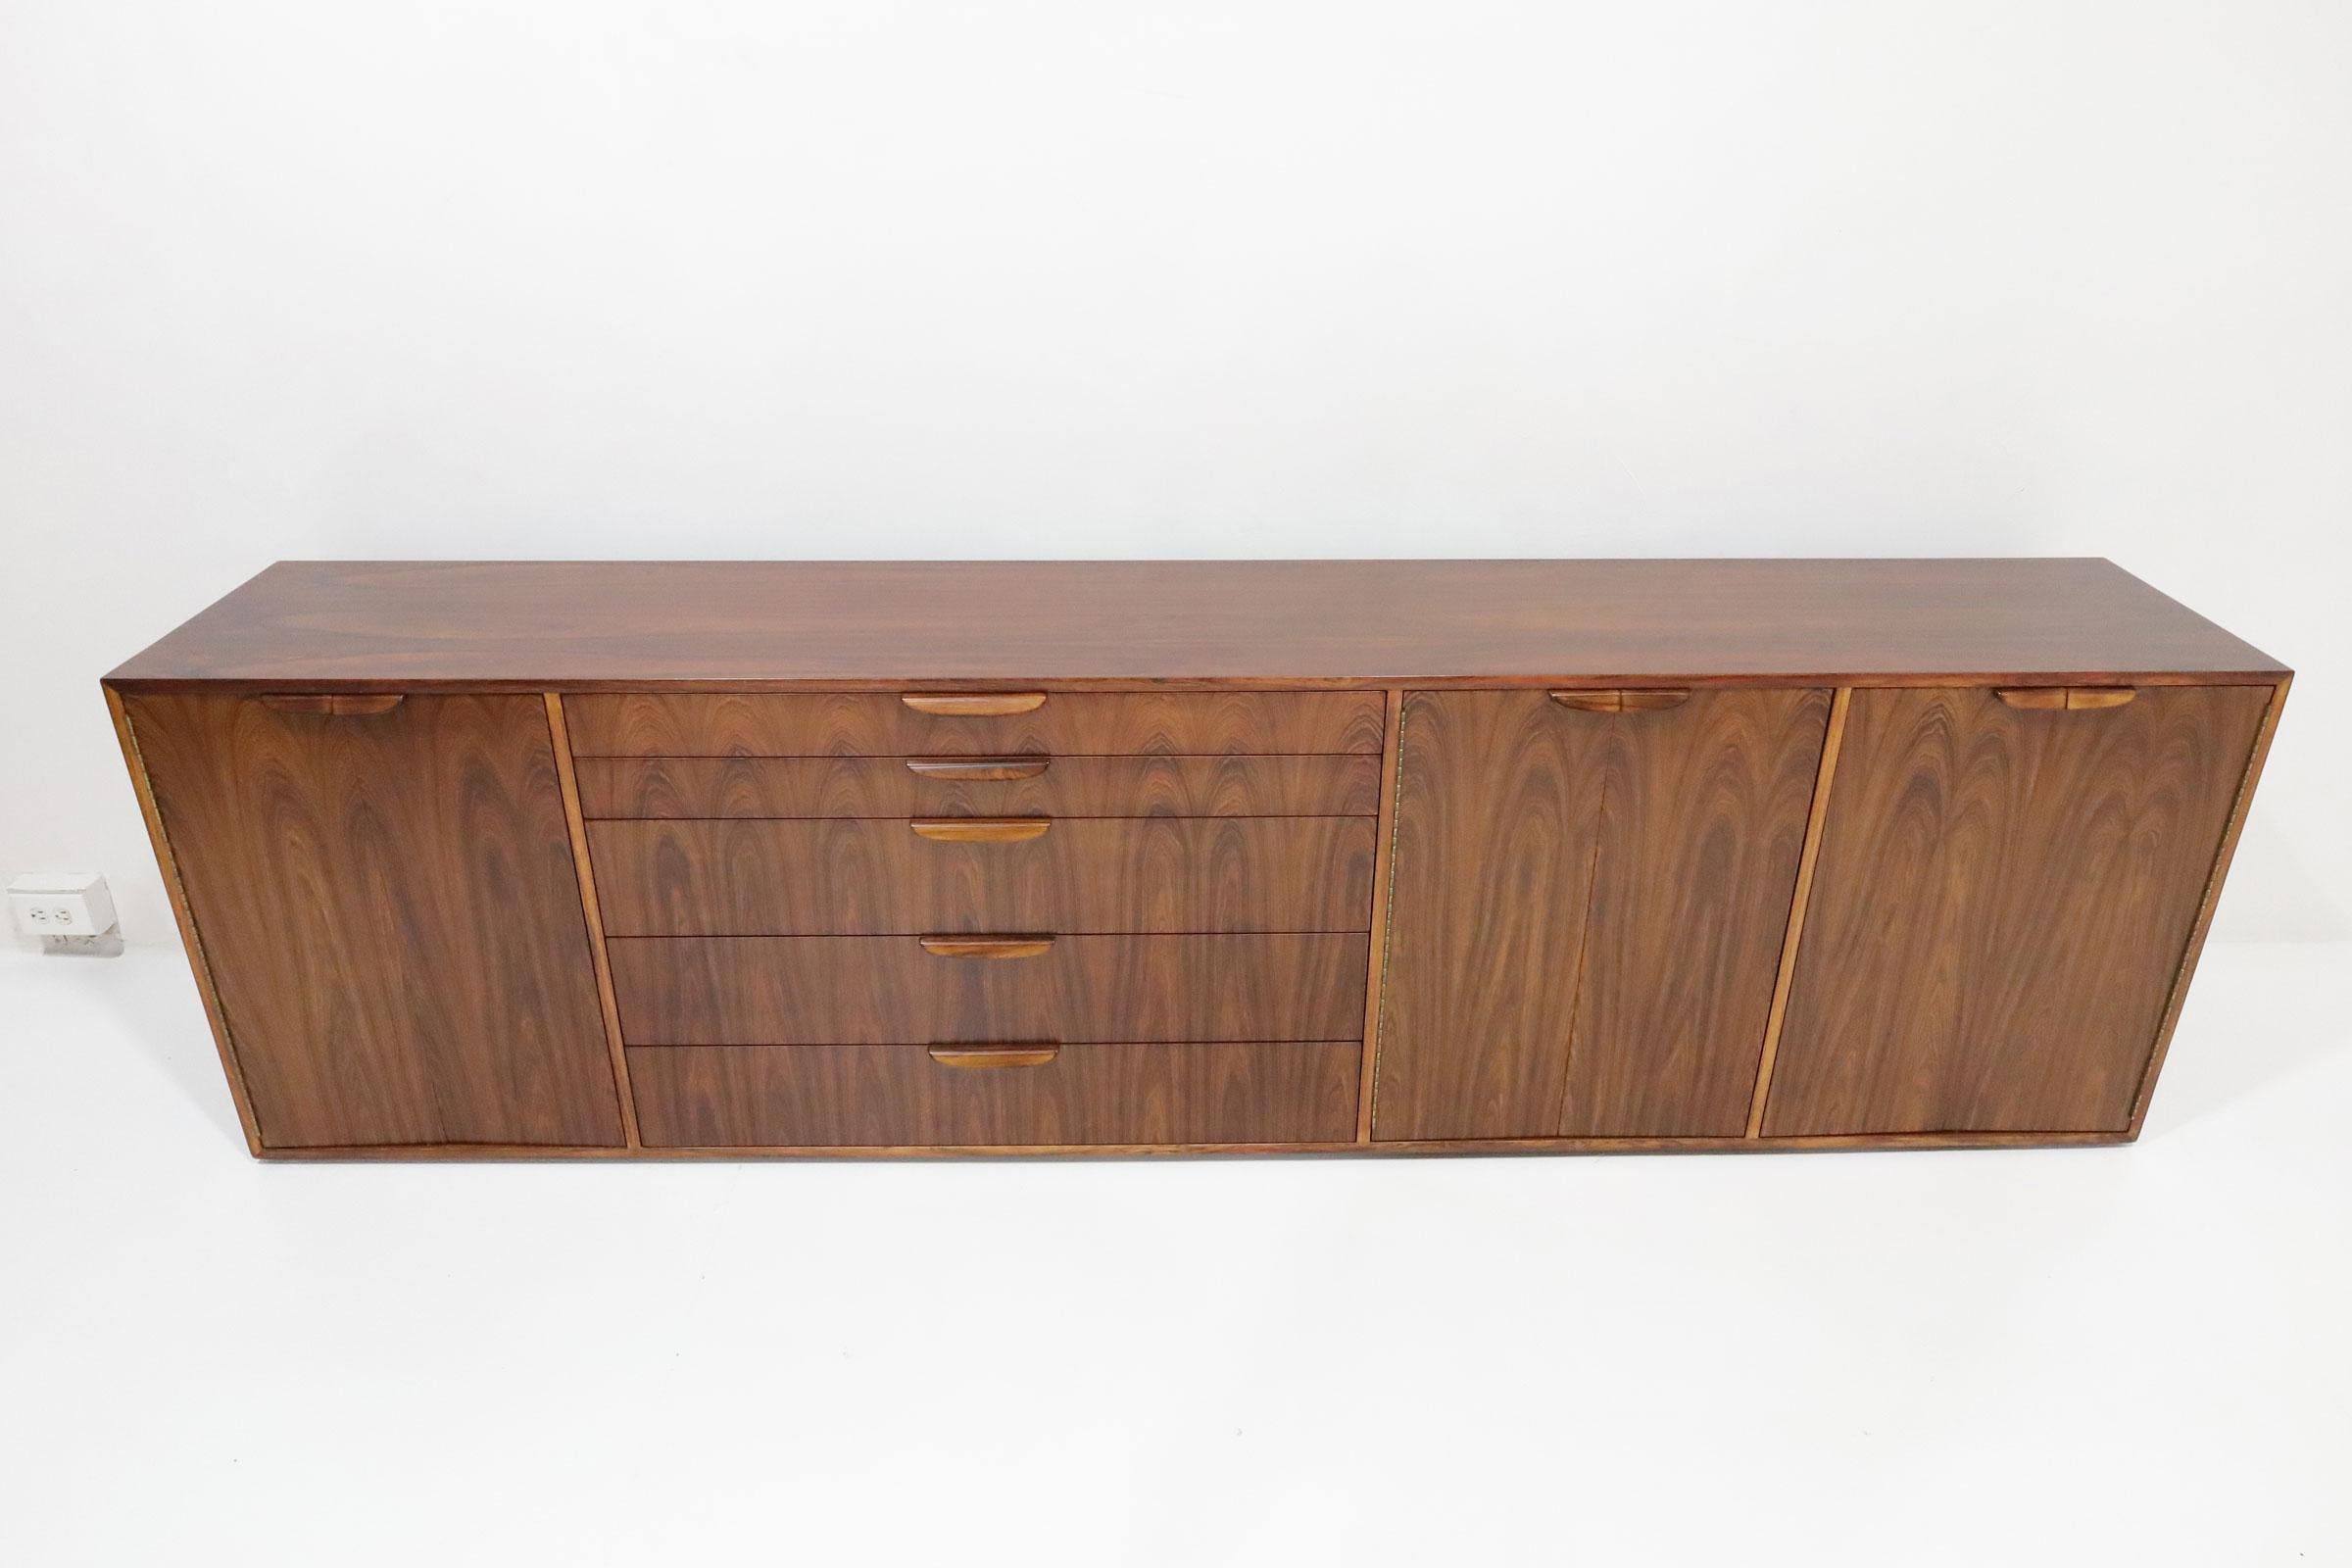 A spectacular large sideboard by Harvey Probber. This sideboard offers plenty of storage. The design is dramatic with a rosewood finish and book matched drawers. This is hard to find piece and will warm up any room with its rich wood grain. Interior